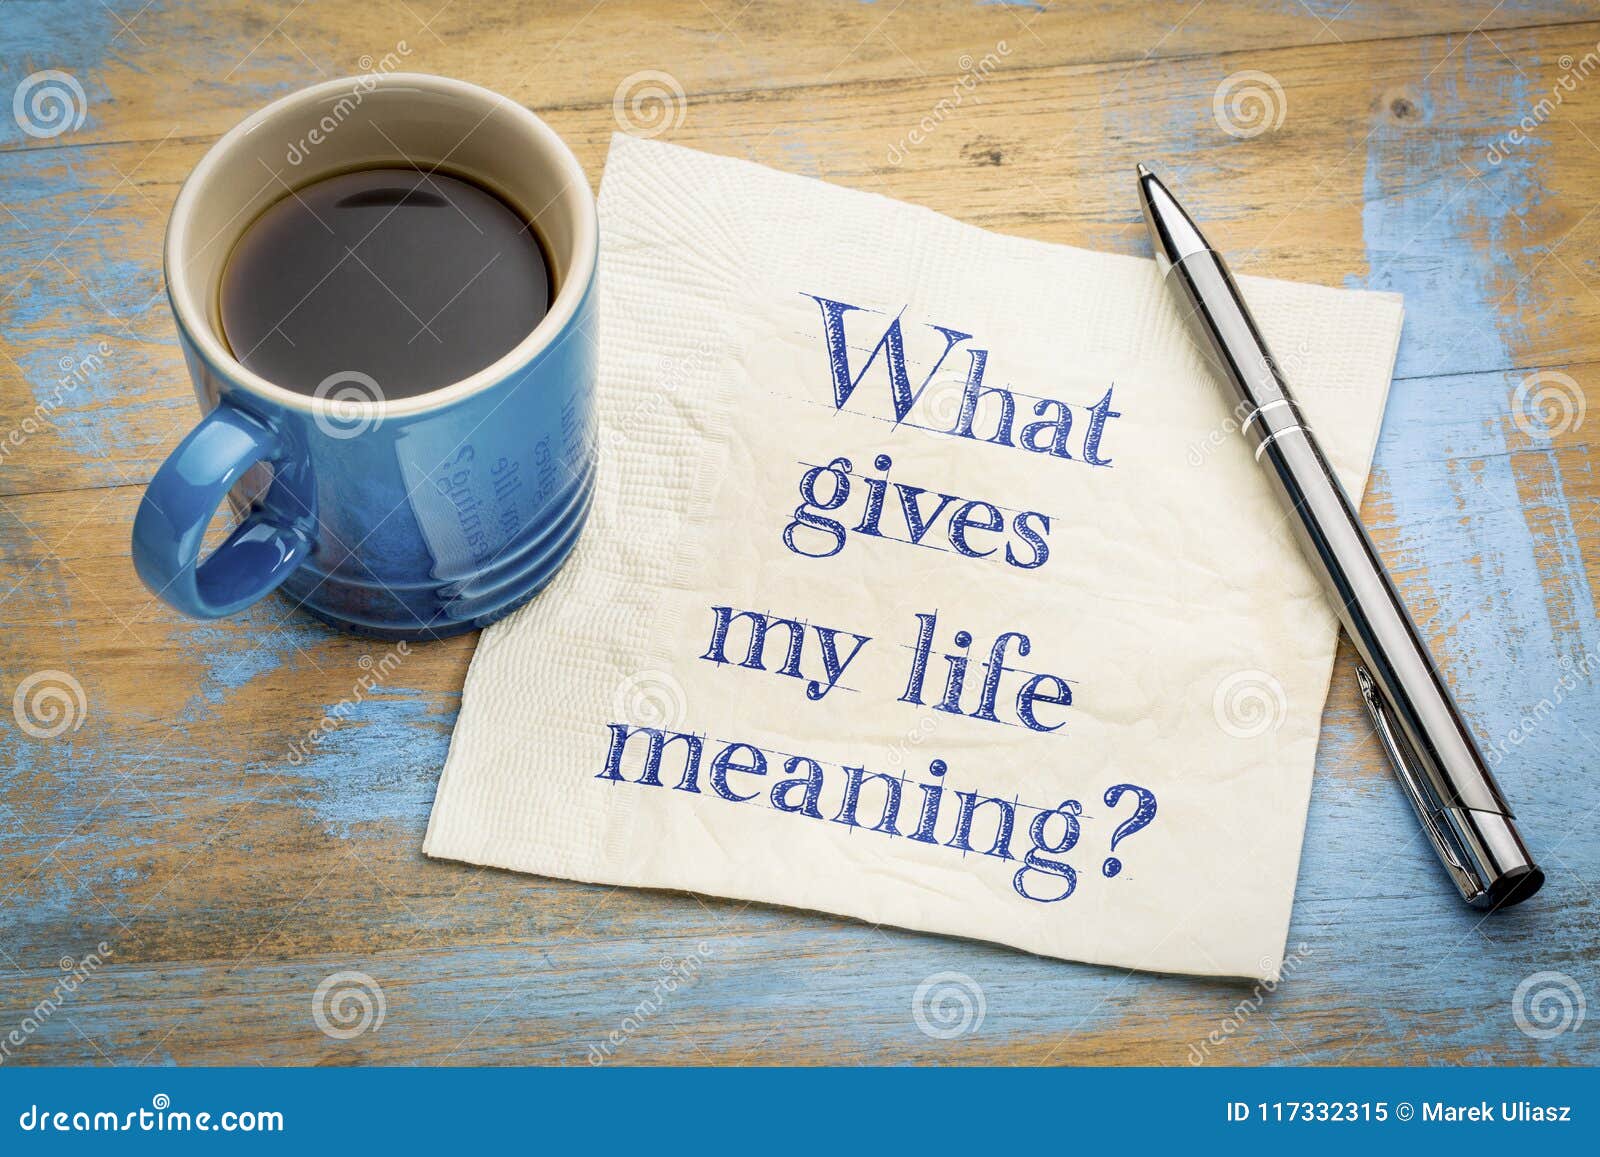 What Gives My Life Meaning? Stock Image - Image of message, question ...